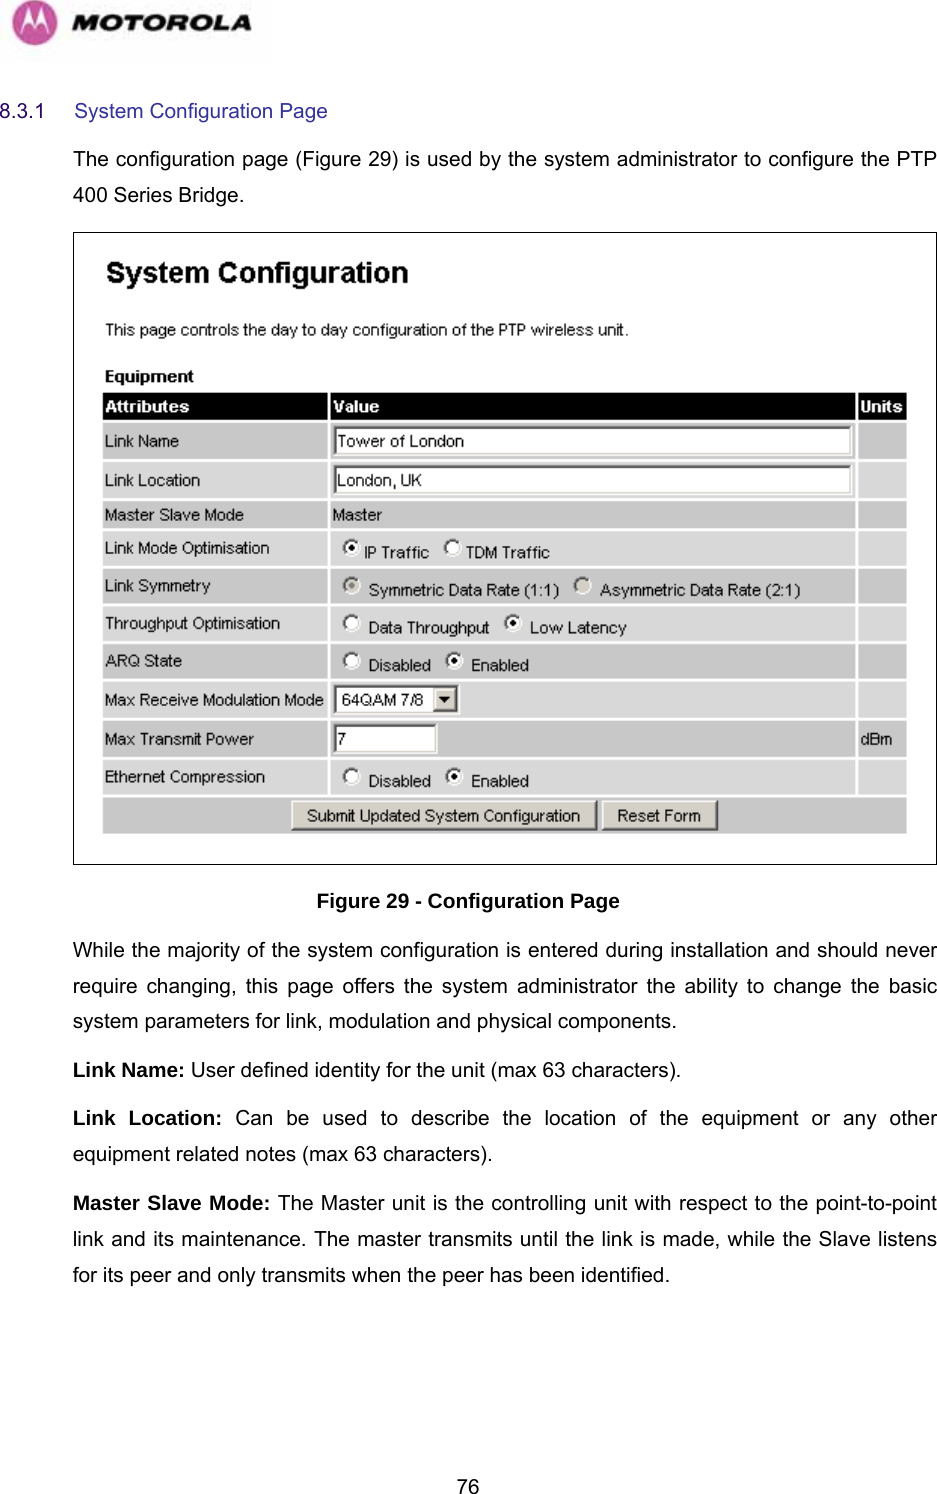   768.3.1  System Configuration Page  The configuration page (Figure 29) is used by the system administrator to configure the PTP 400 Series Bridge.  Figure 29 - Configuration Page While the majority of the system configuration is entered during installation and should never require changing, this page offers the system administrator the ability to change the basic system parameters for link, modulation and physical components.  Link Name: User defined identity for the unit (max 63 characters).  Link Location: Can be used to describe the location of the equipment or any other equipment related notes (max 63 characters).  Master Slave Mode: The Master unit is the controlling unit with respect to the point-to-point link and its maintenance. The master transmits until the link is made, while the Slave listens for its peer and only transmits when the peer has been identified. 